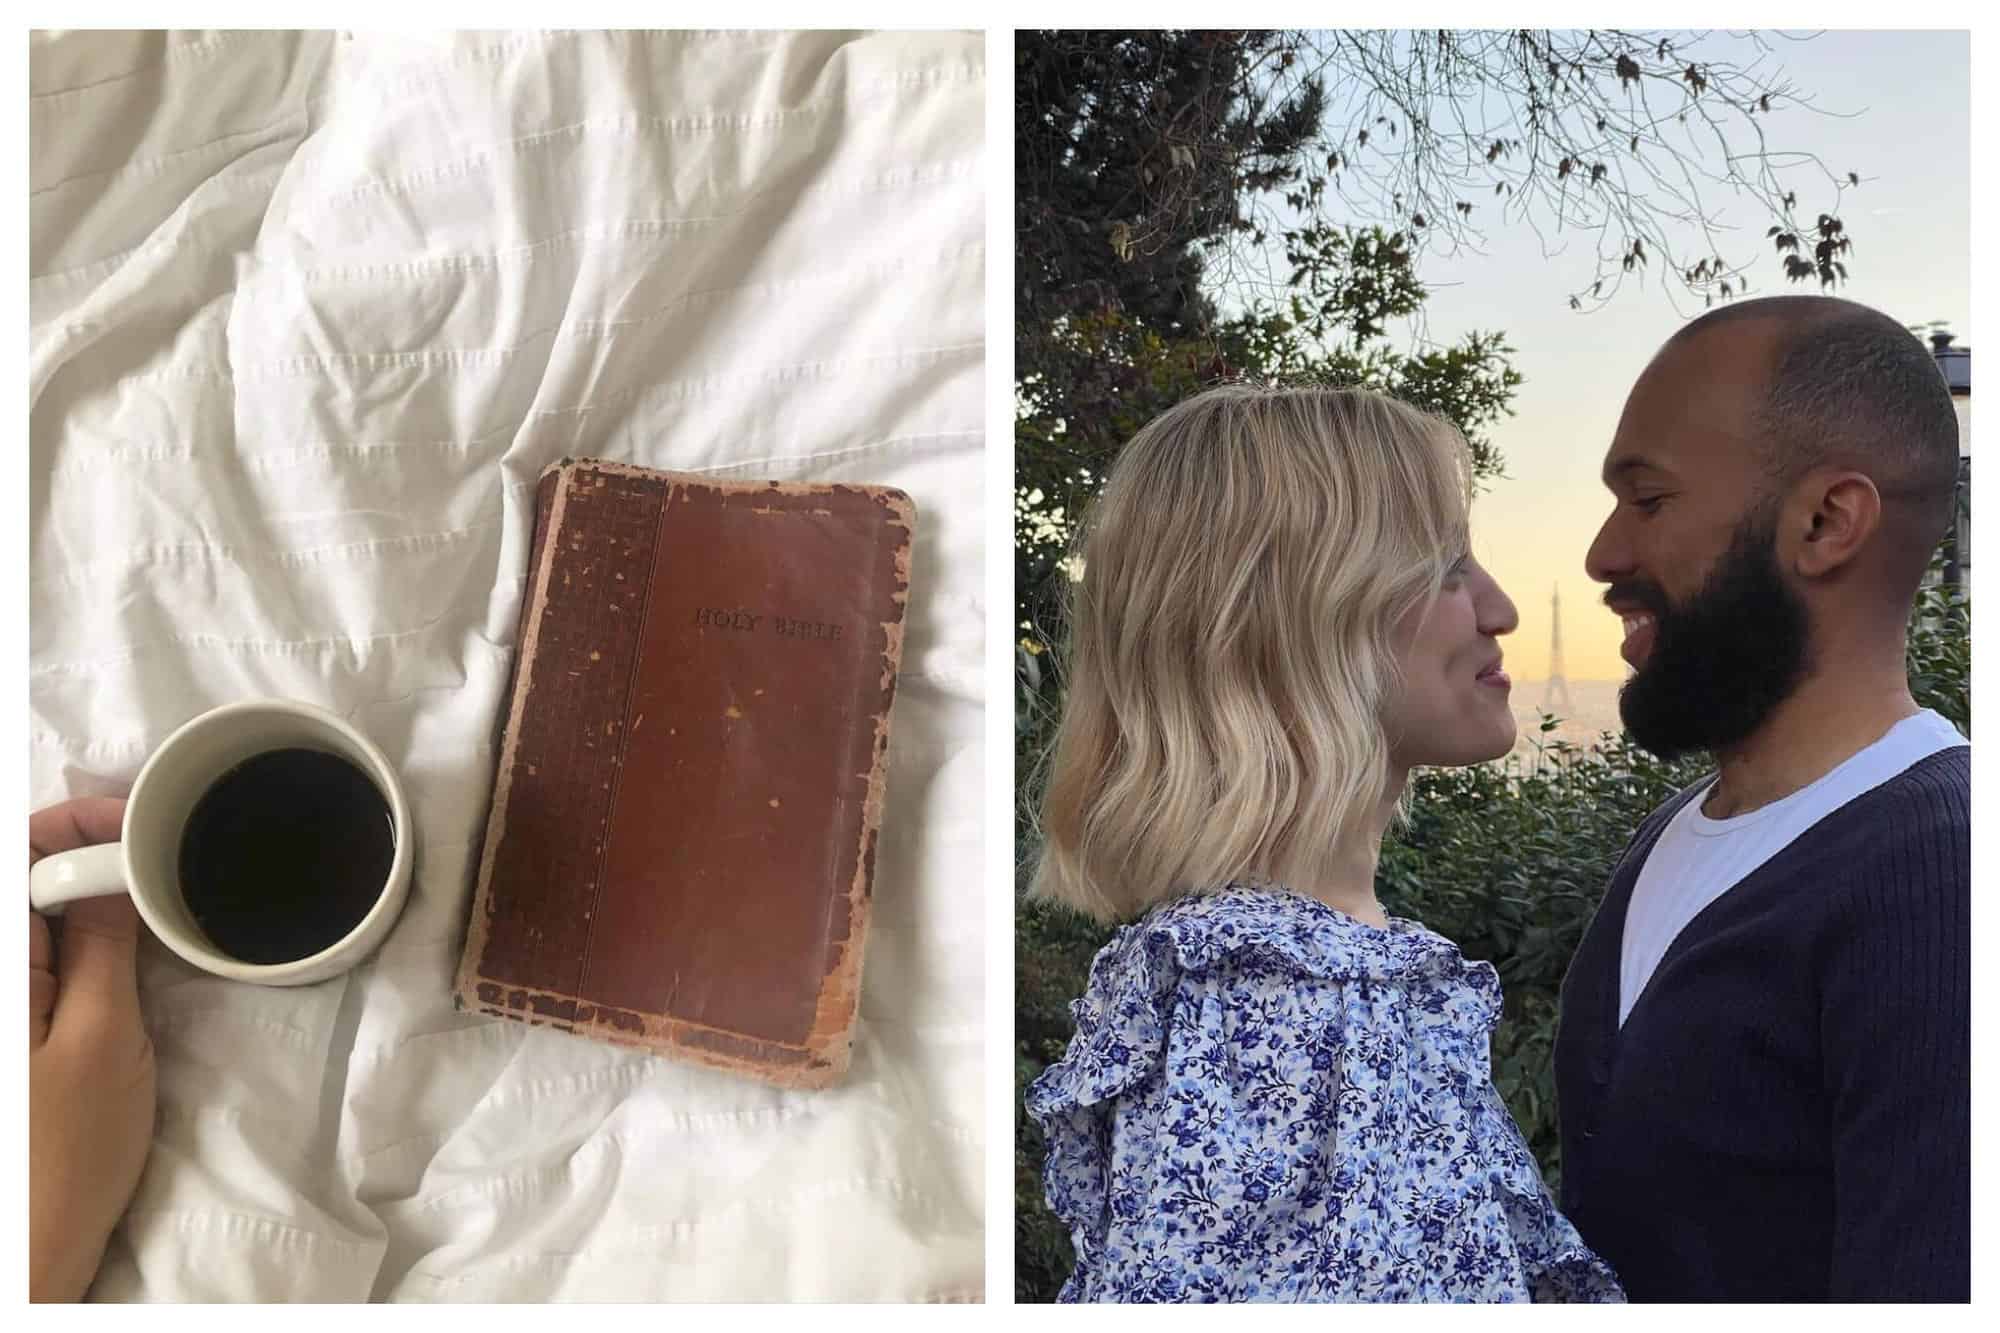 Left: a white duvet with a cup of cofee next to an antique brown leather bound book. Right: A blond haired woman embraces an olive skinned, bearded man. They are both smiling and are outdoors with green shrubs and a tree behind them and the Eiffel Tower at dusk in the distance.